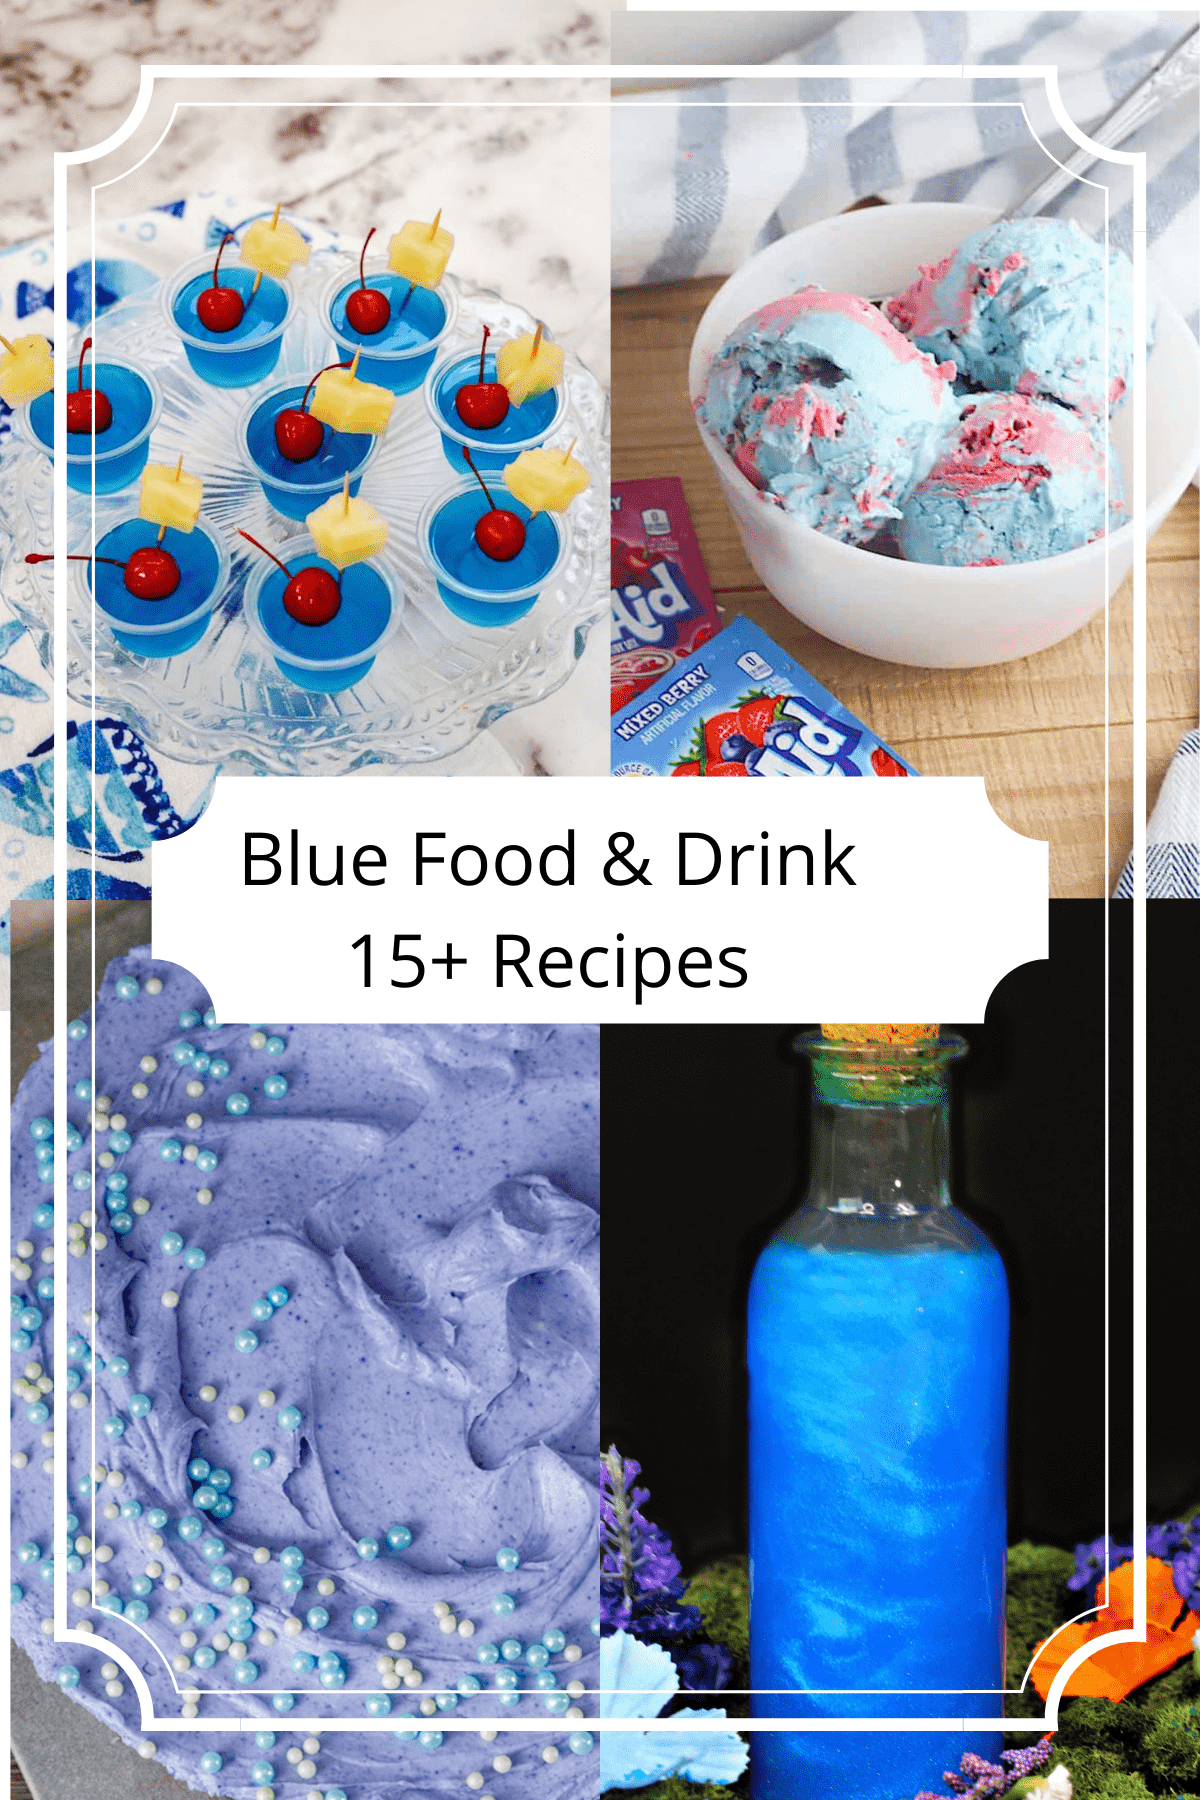 4 recipe images for blue jello shots, ice cream, cheesecake and cocktail.